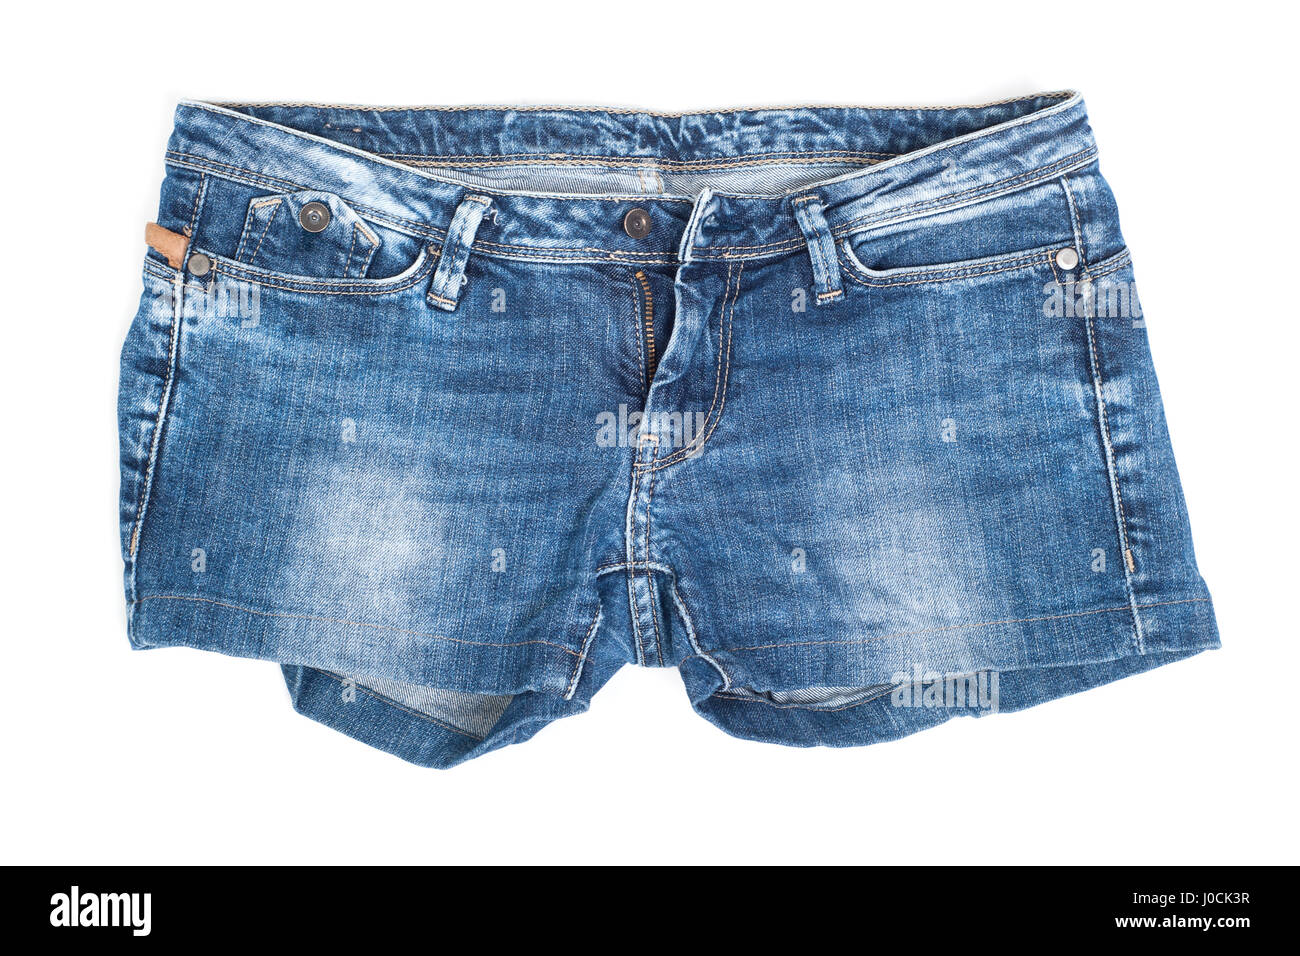 Blue Jean Shorts High Resolution Stock Photography and Images - Alamy